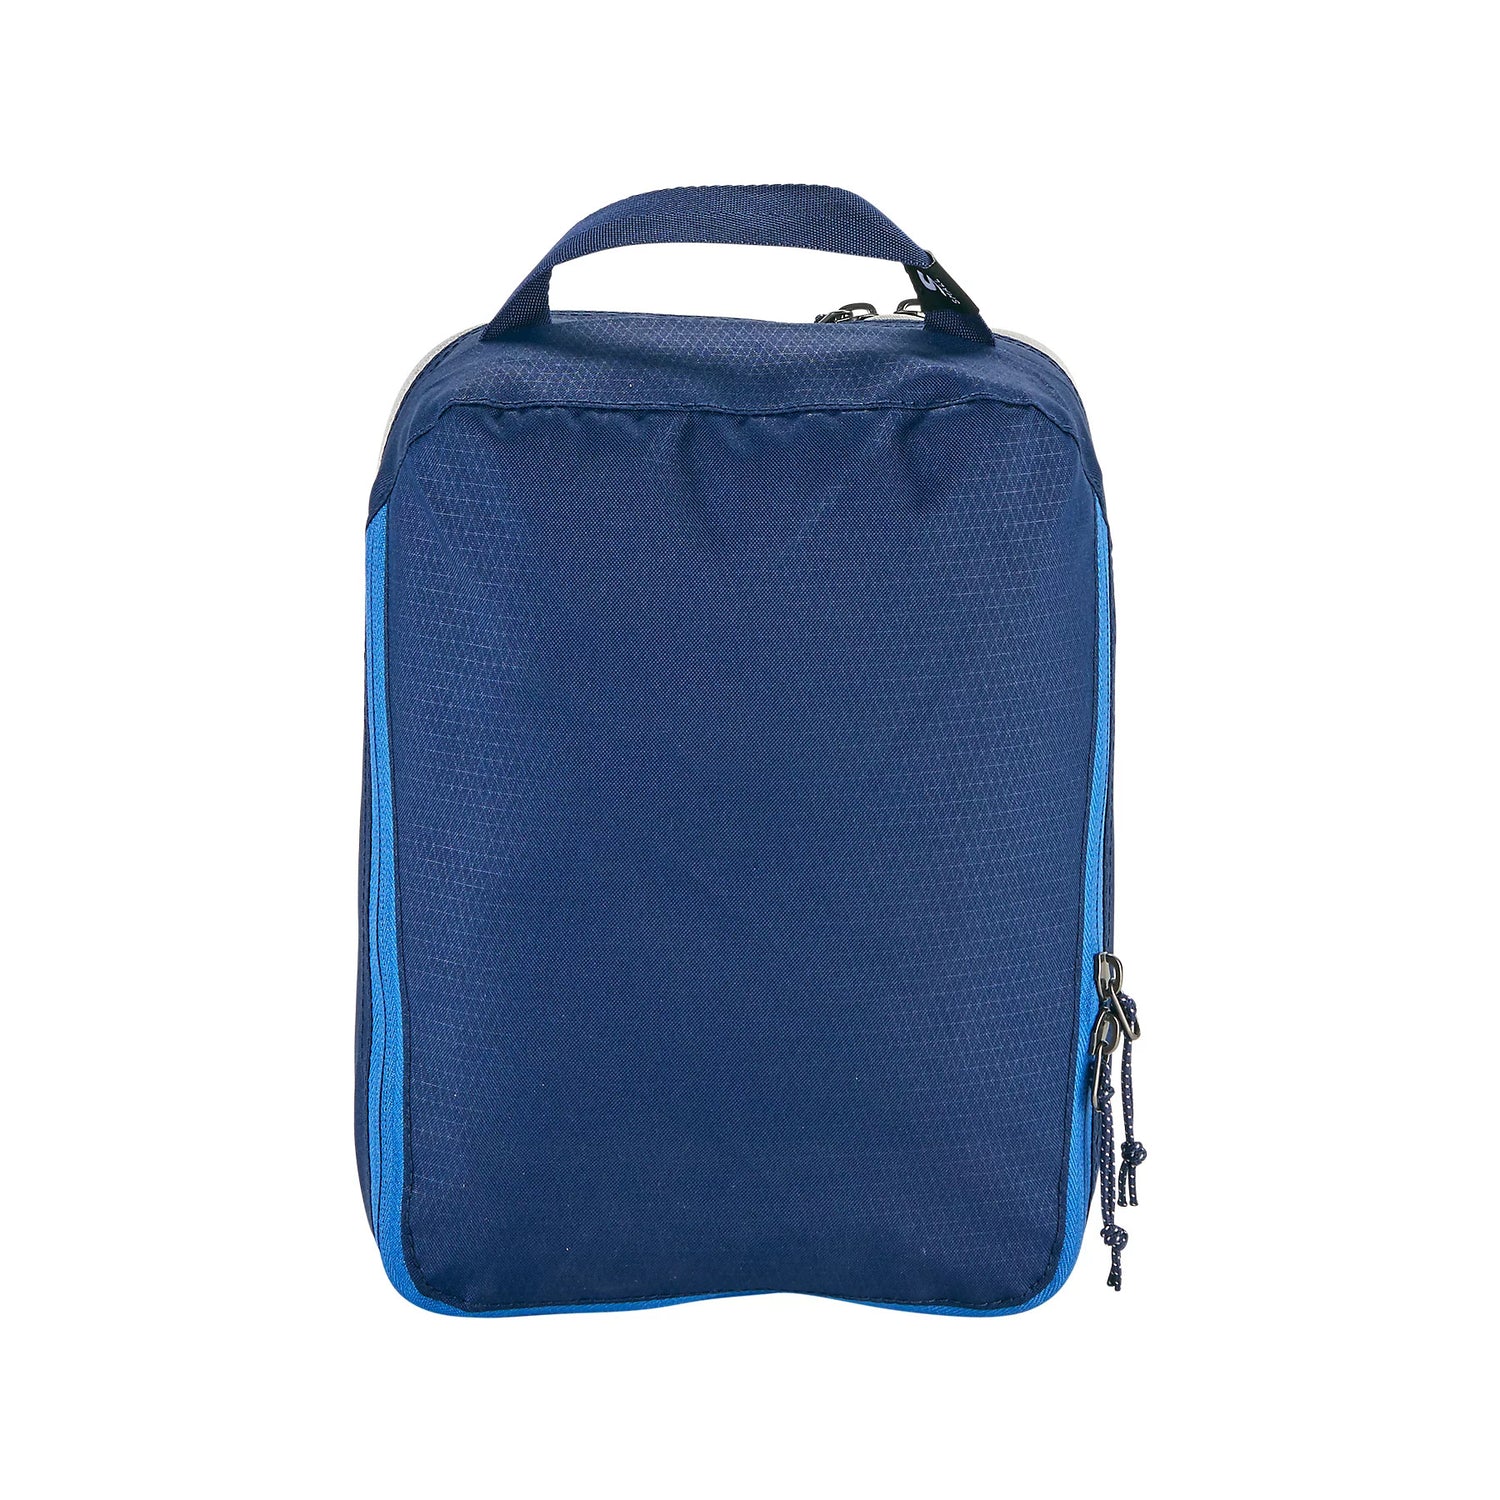 PACK-IT™ Reveal Clean/Dirty Cube S - AIZOME BLUE/GREY